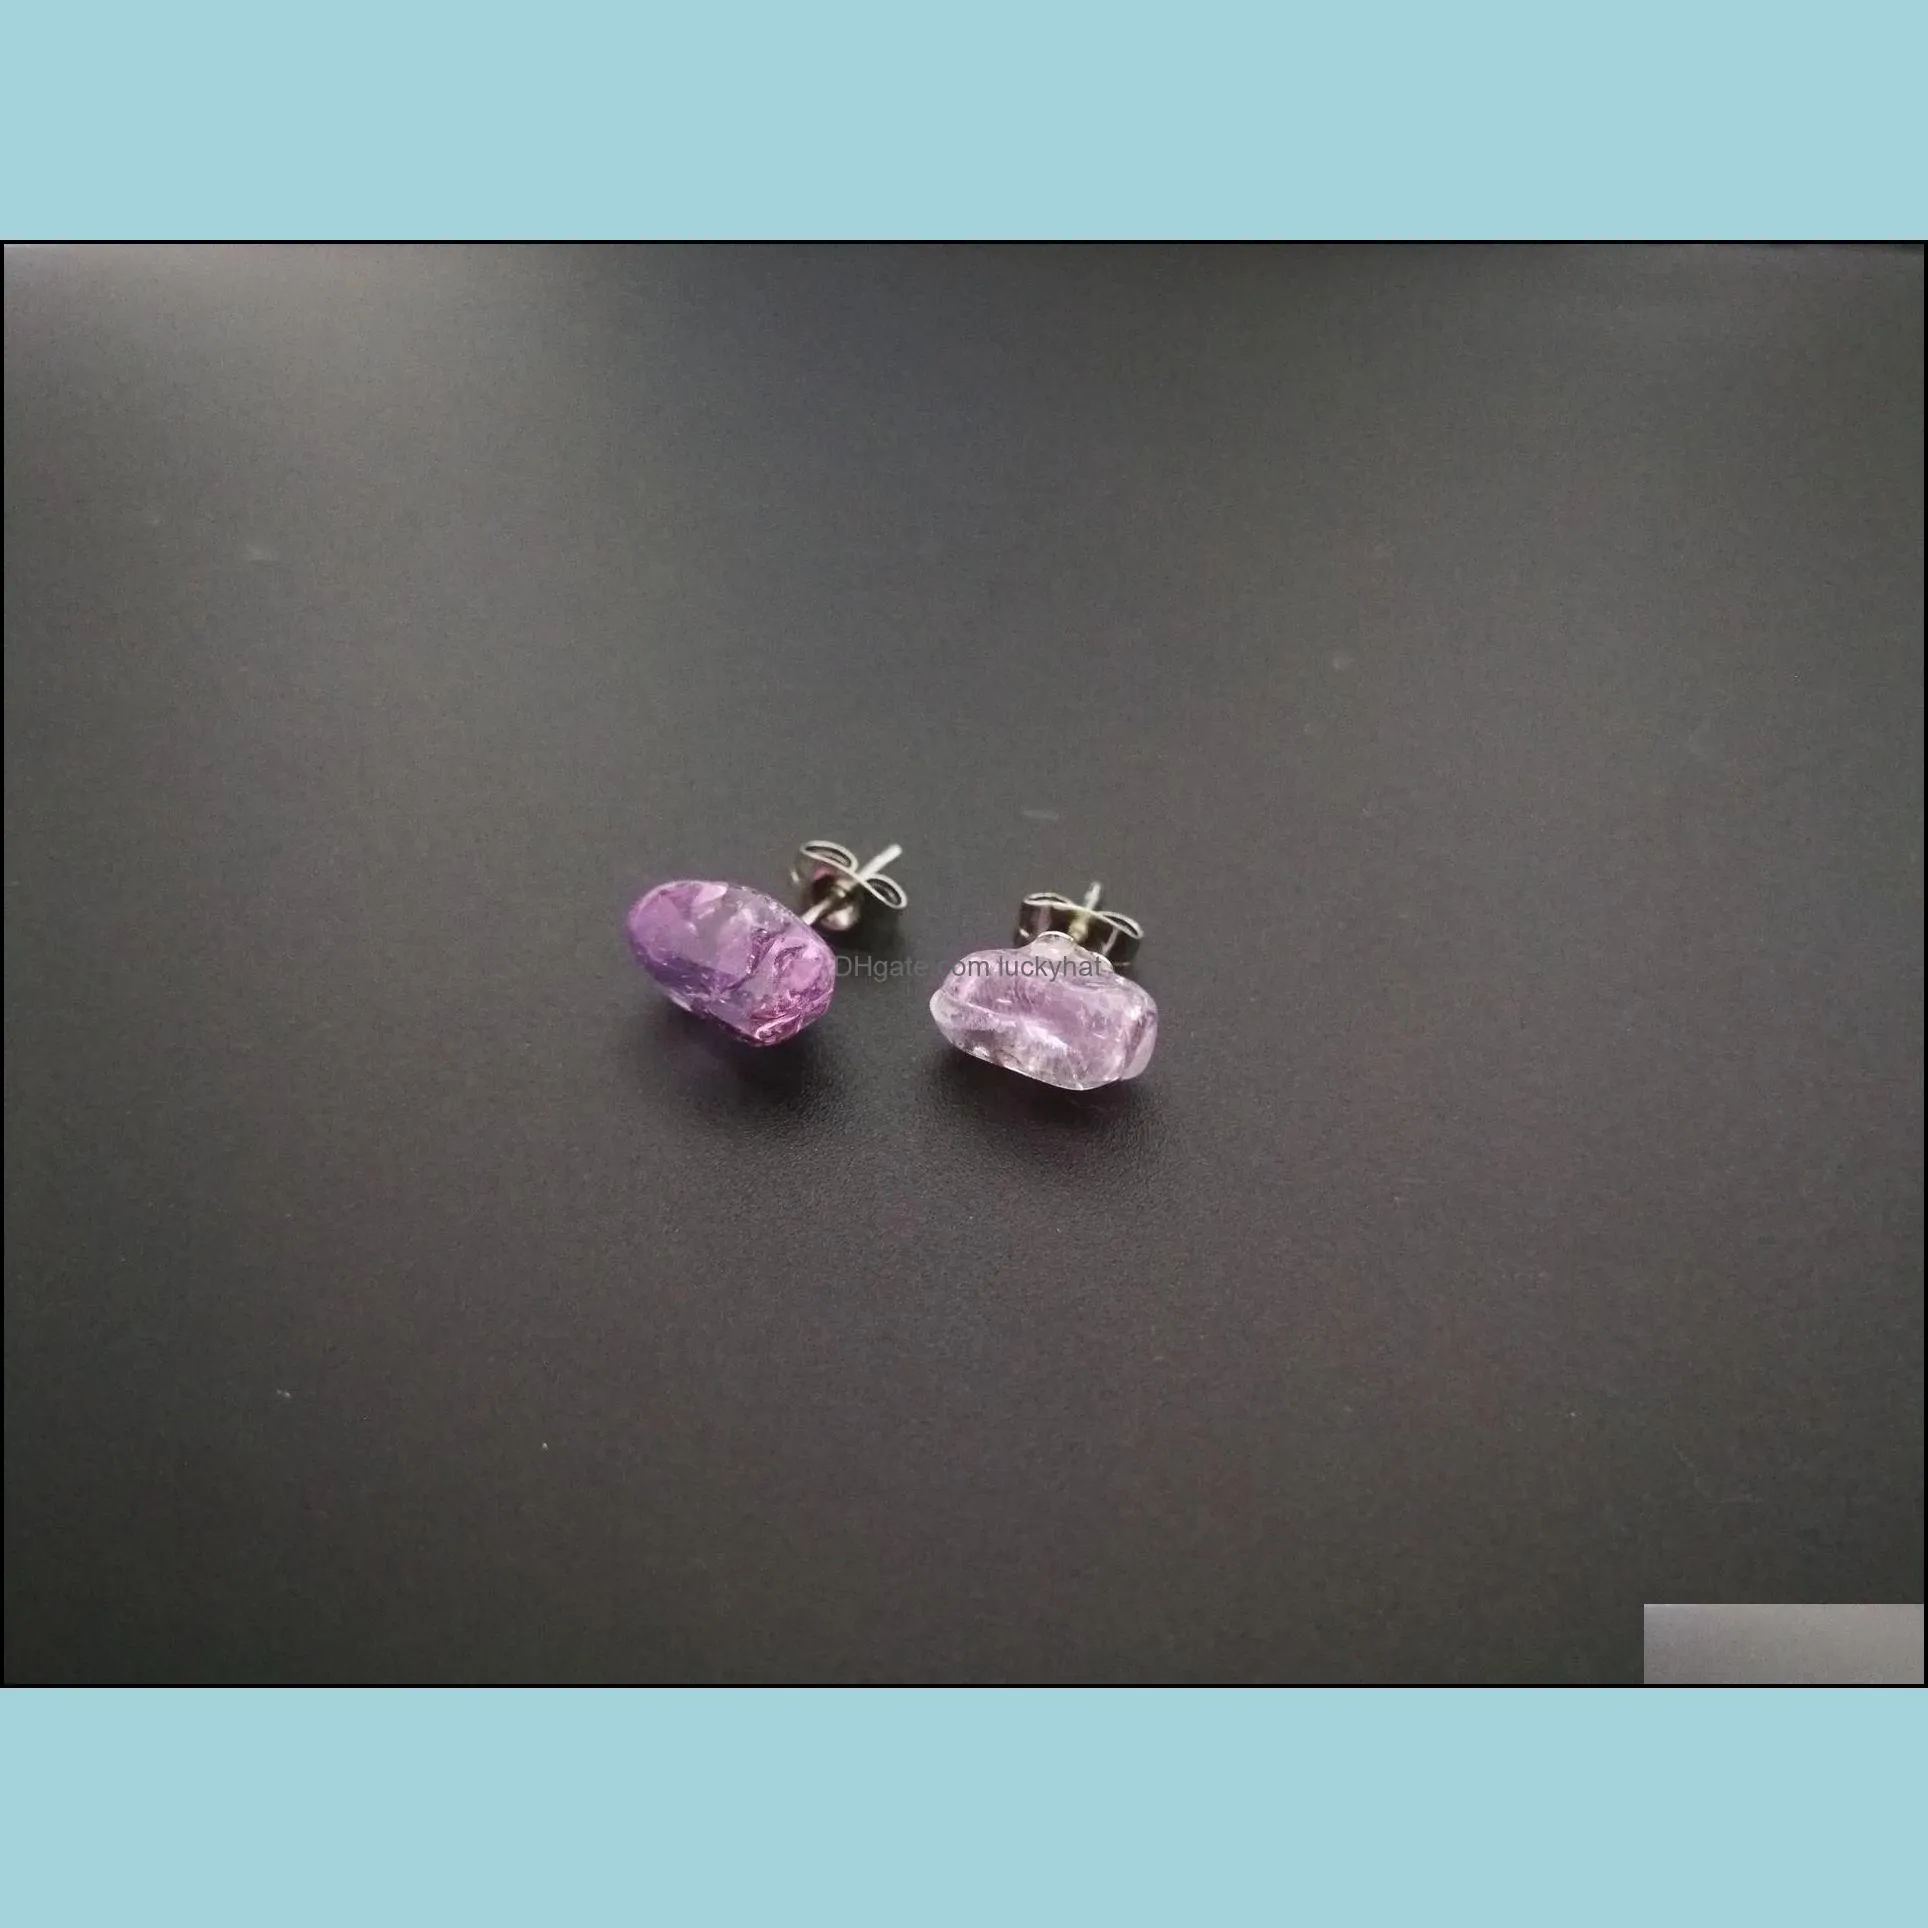 broken stone beads crystal stud earrings purple white quartz amethyst red beads studs earring for wome luckyhat